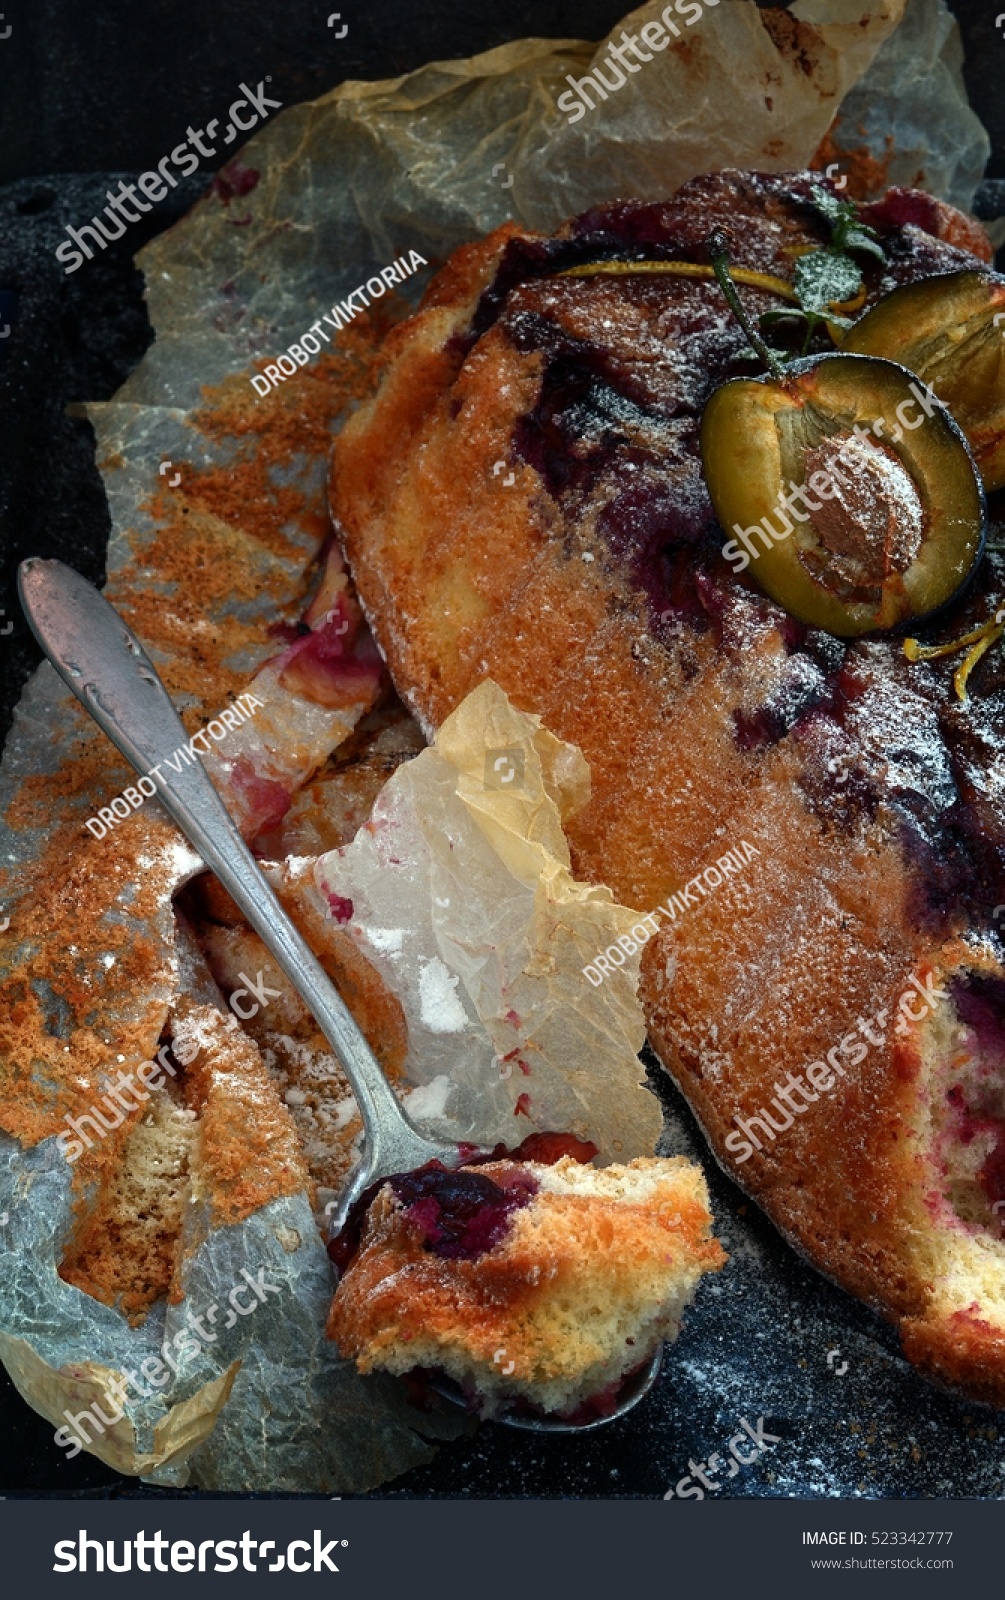 air sponge cake with plums and icing sugar on a dark background #523342777